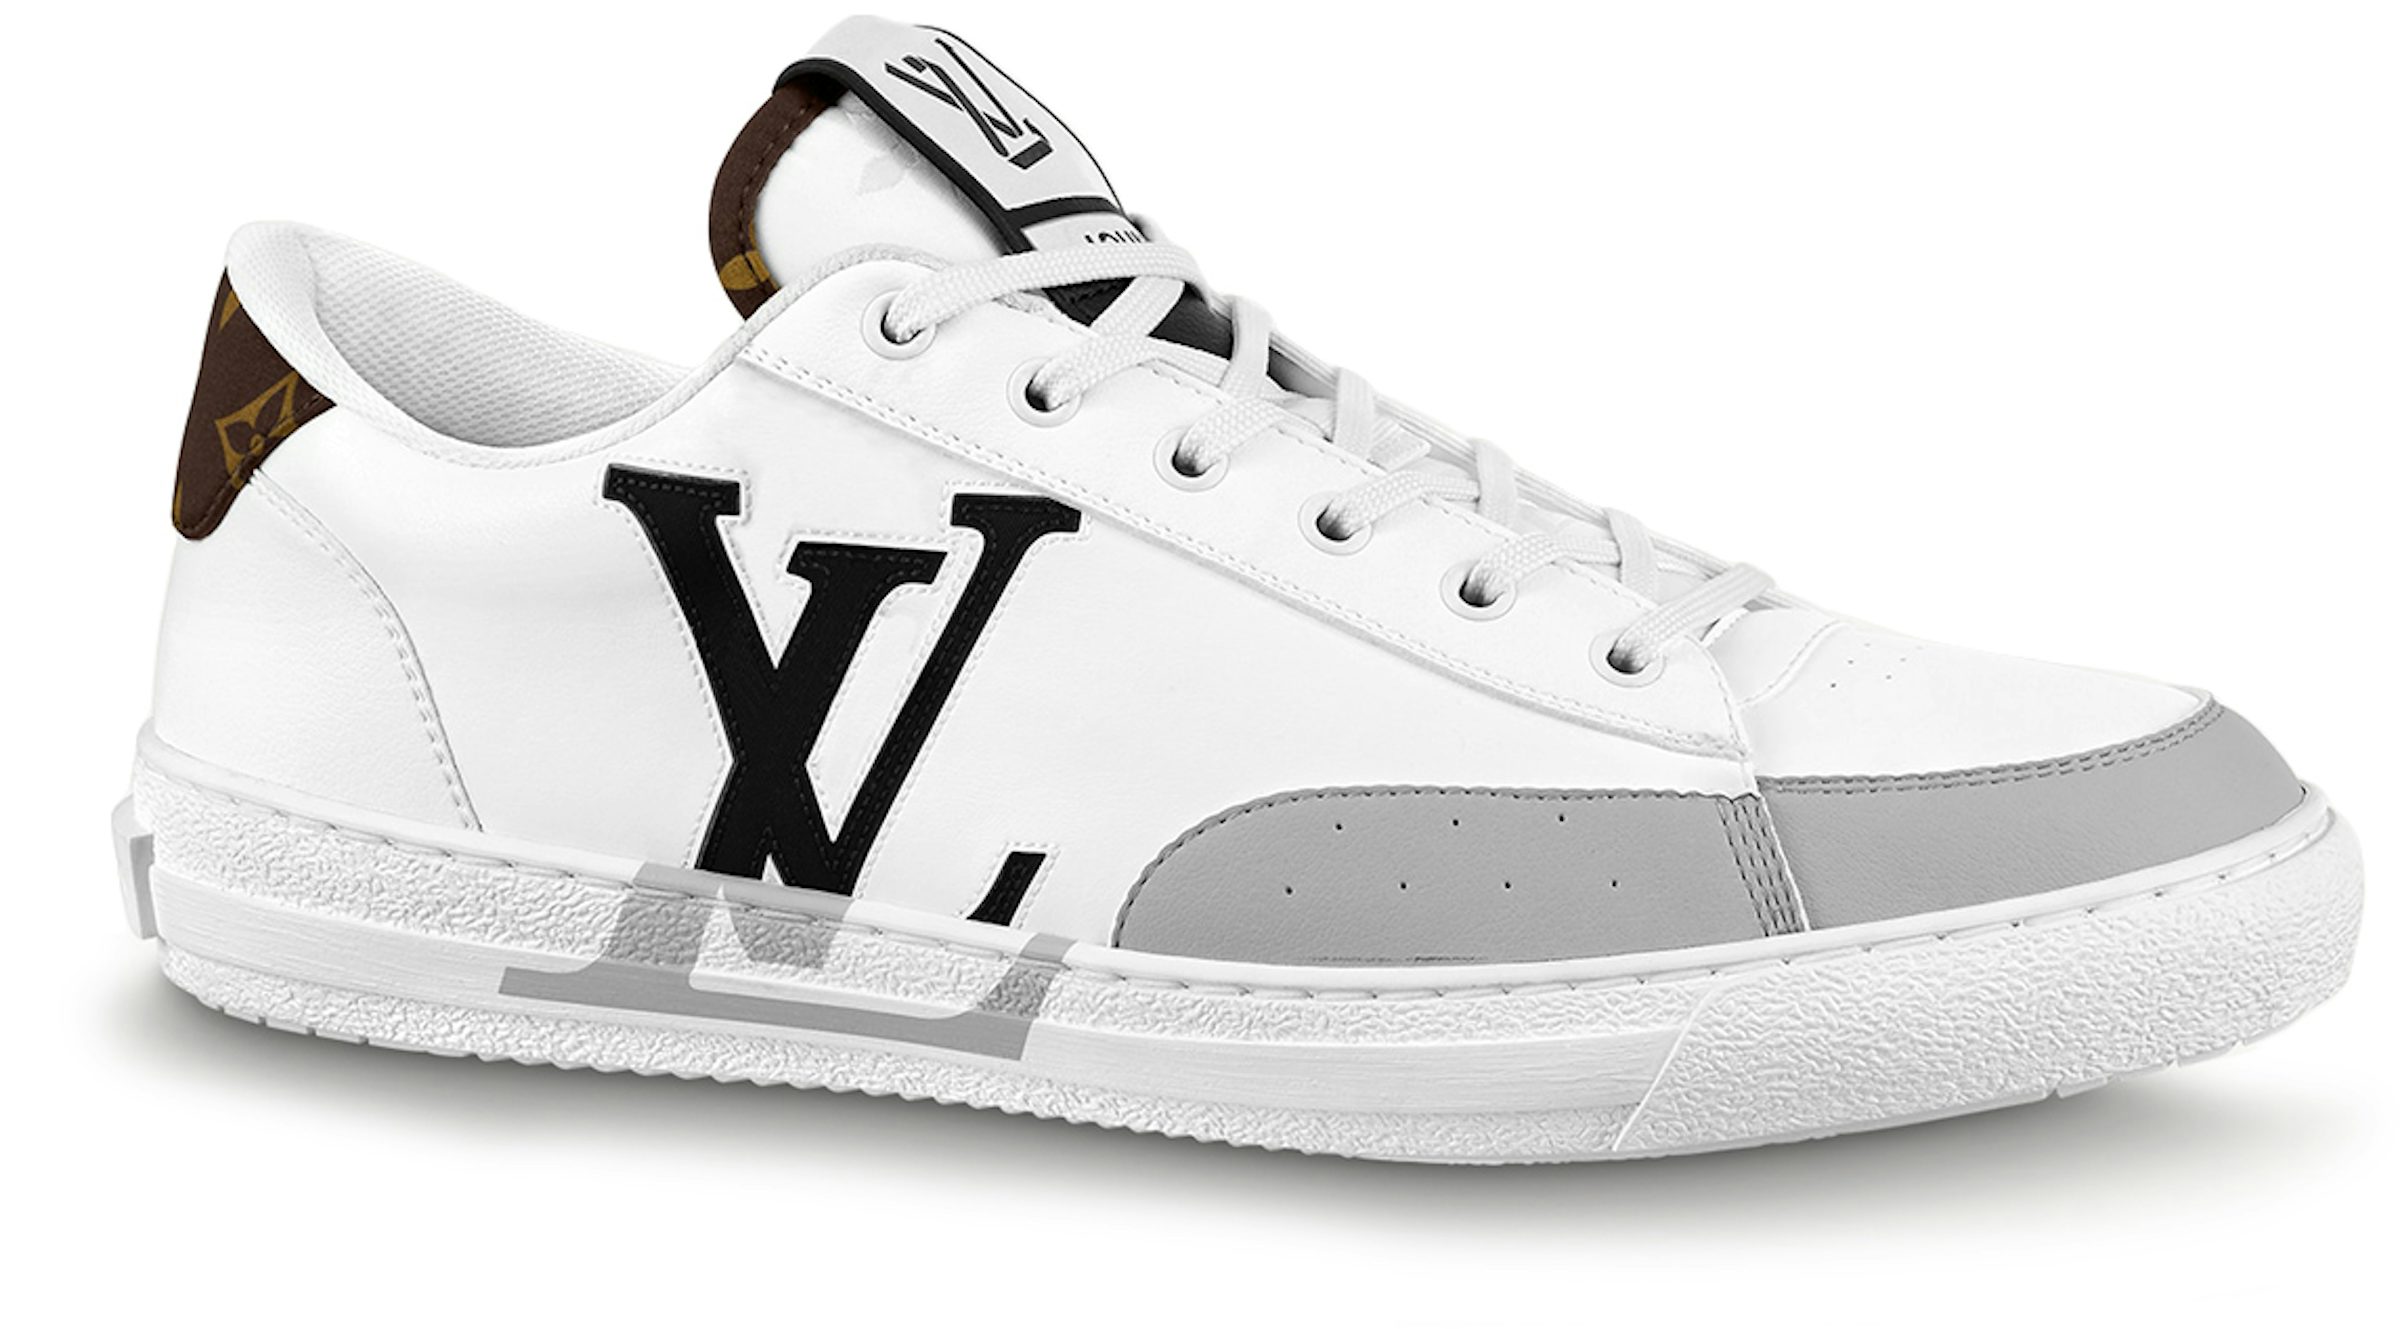 Buy Louis Vuitton Size 5 Shoes & New Sneakers - StockX